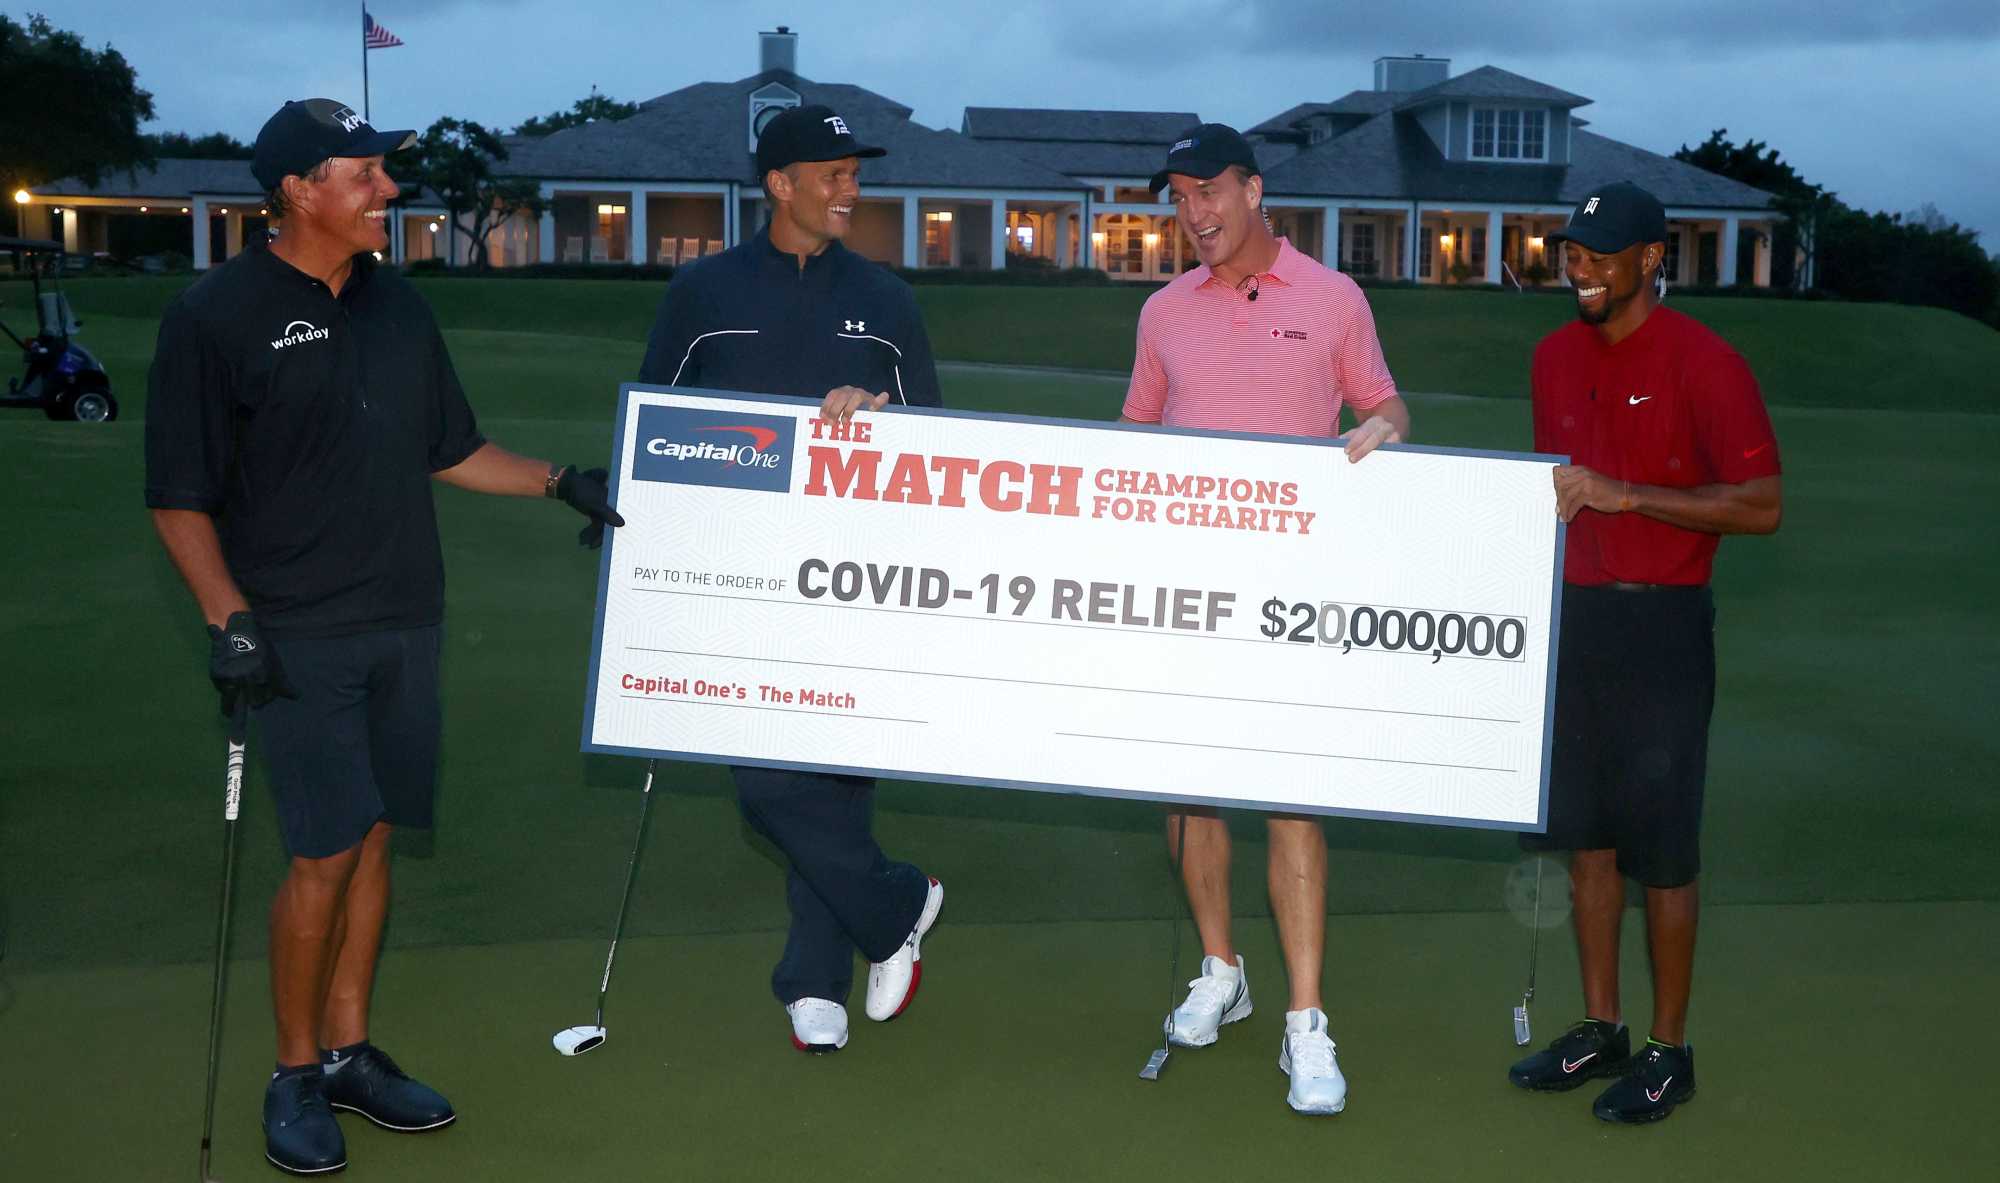 Phil Mickelson, Tom Brady, Peyton Manning and Tiger Woods raised $US 20 million for Covid-19 relief. Photo: Getty Images